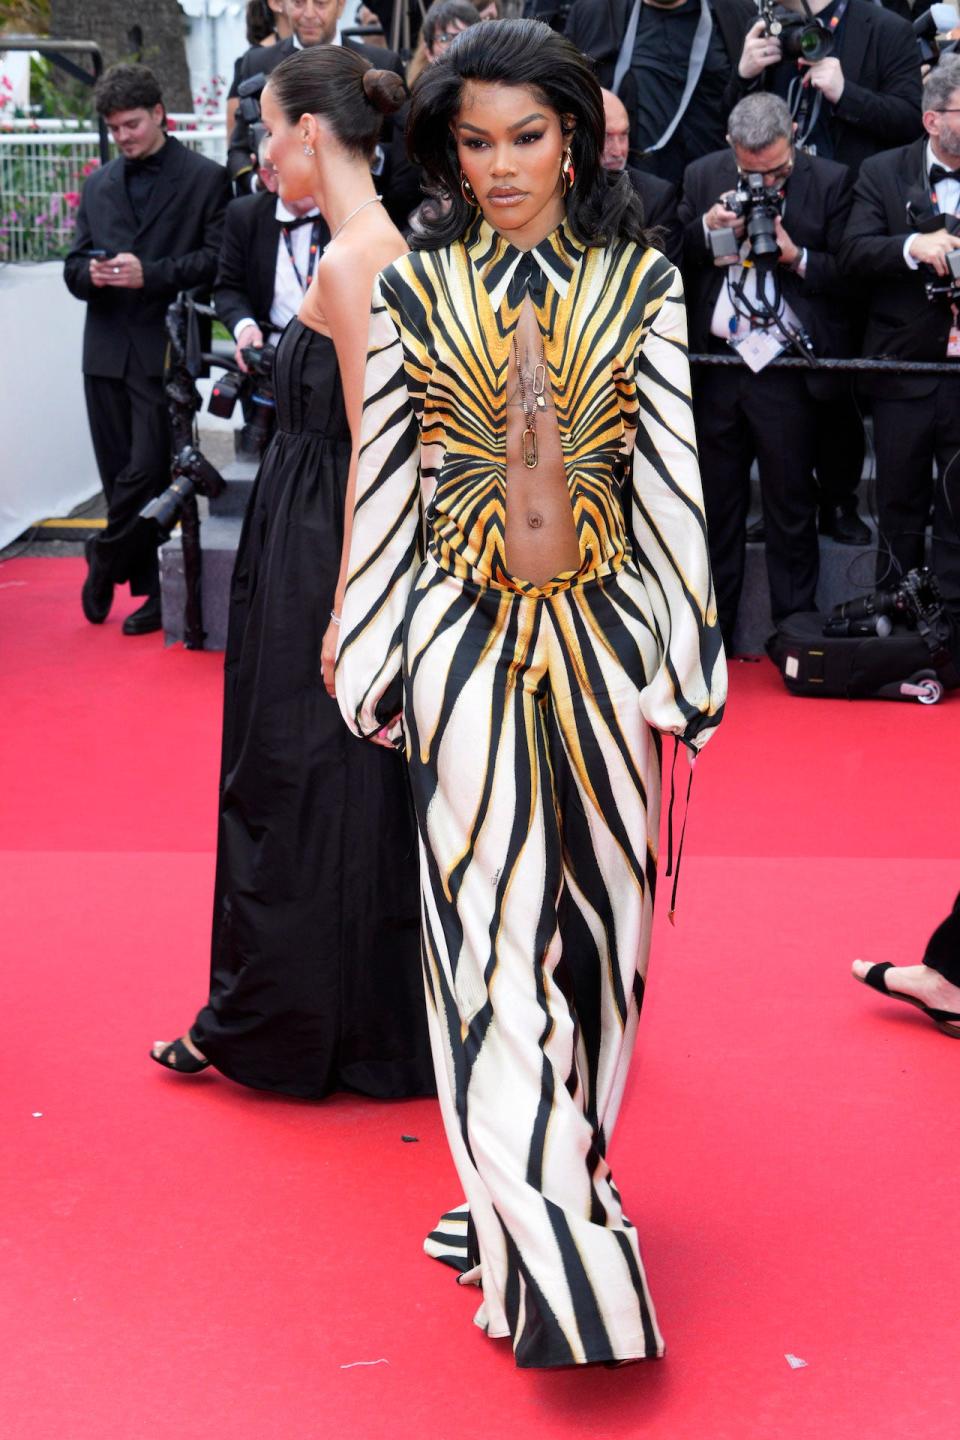 Actor Teyana Taylor wearing a black, white, and yellow jumpsuit with a cutout on the red carpet.